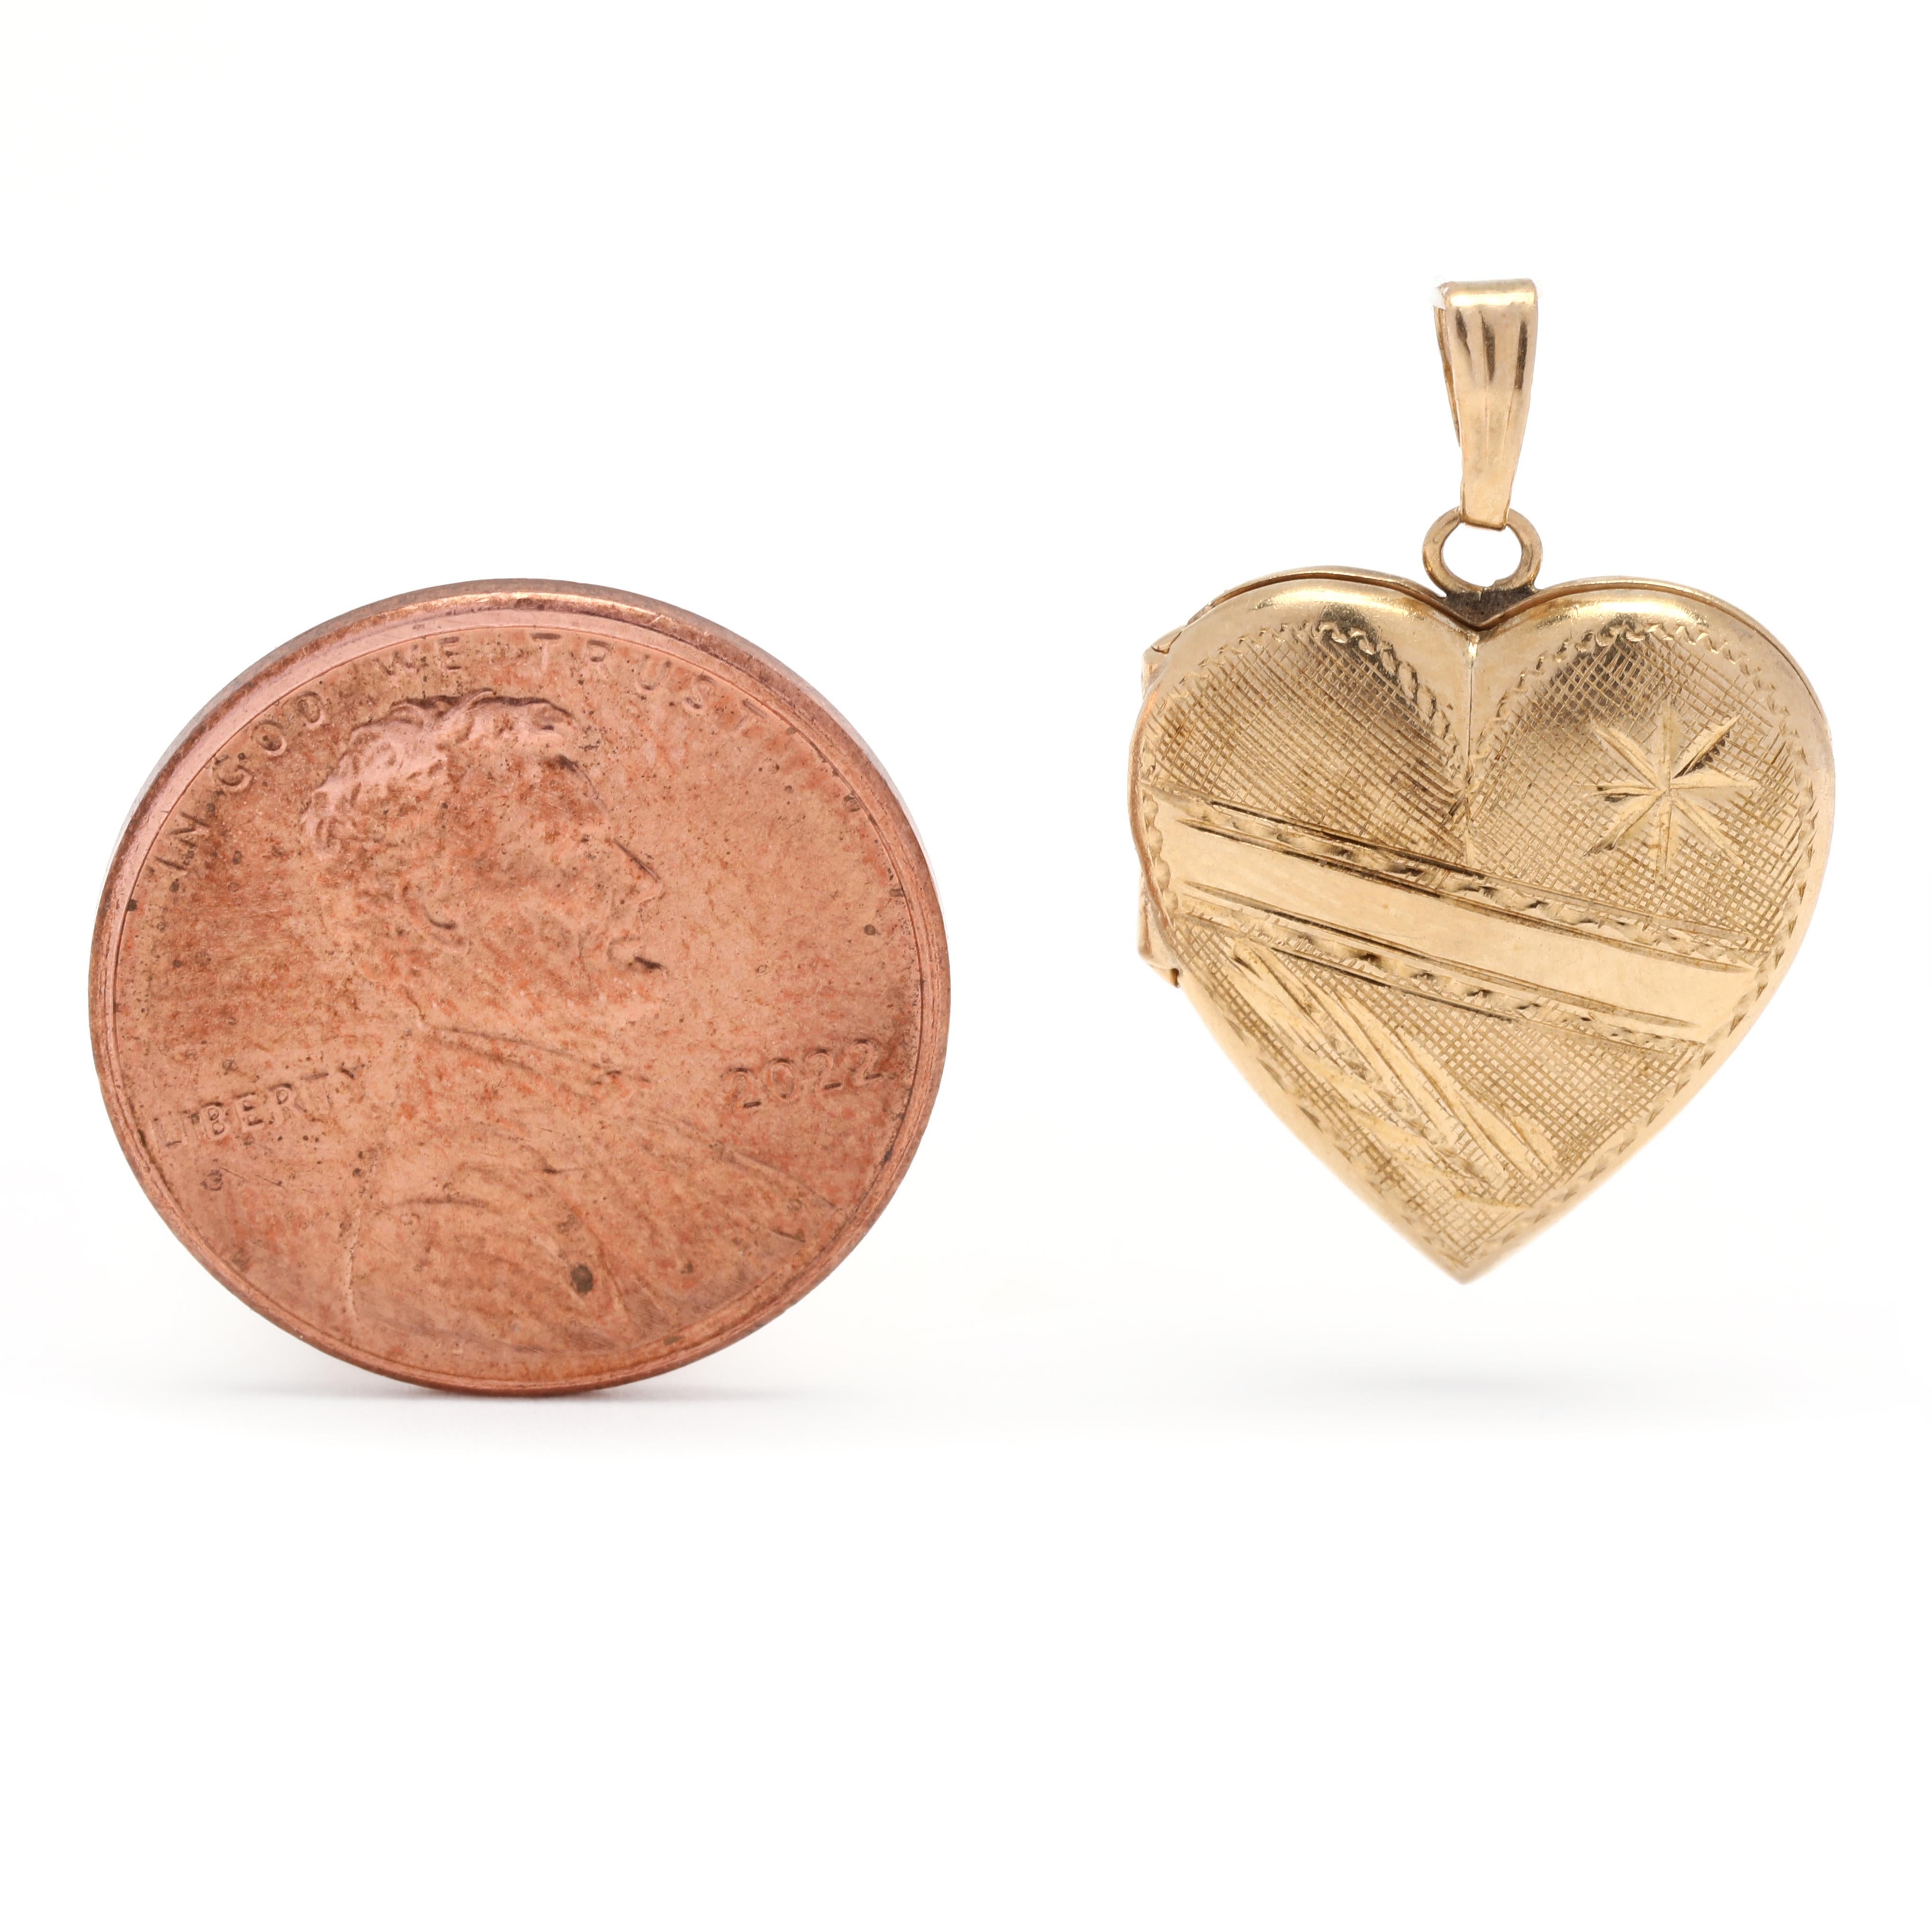 This exquisite 14K yellow gold locket pendant is the perfect way to express your love. Intricately engraved with a heart design, this small gold locket measures 7/8 inch in length. The simple, elegant style of this small gold locket makes it an